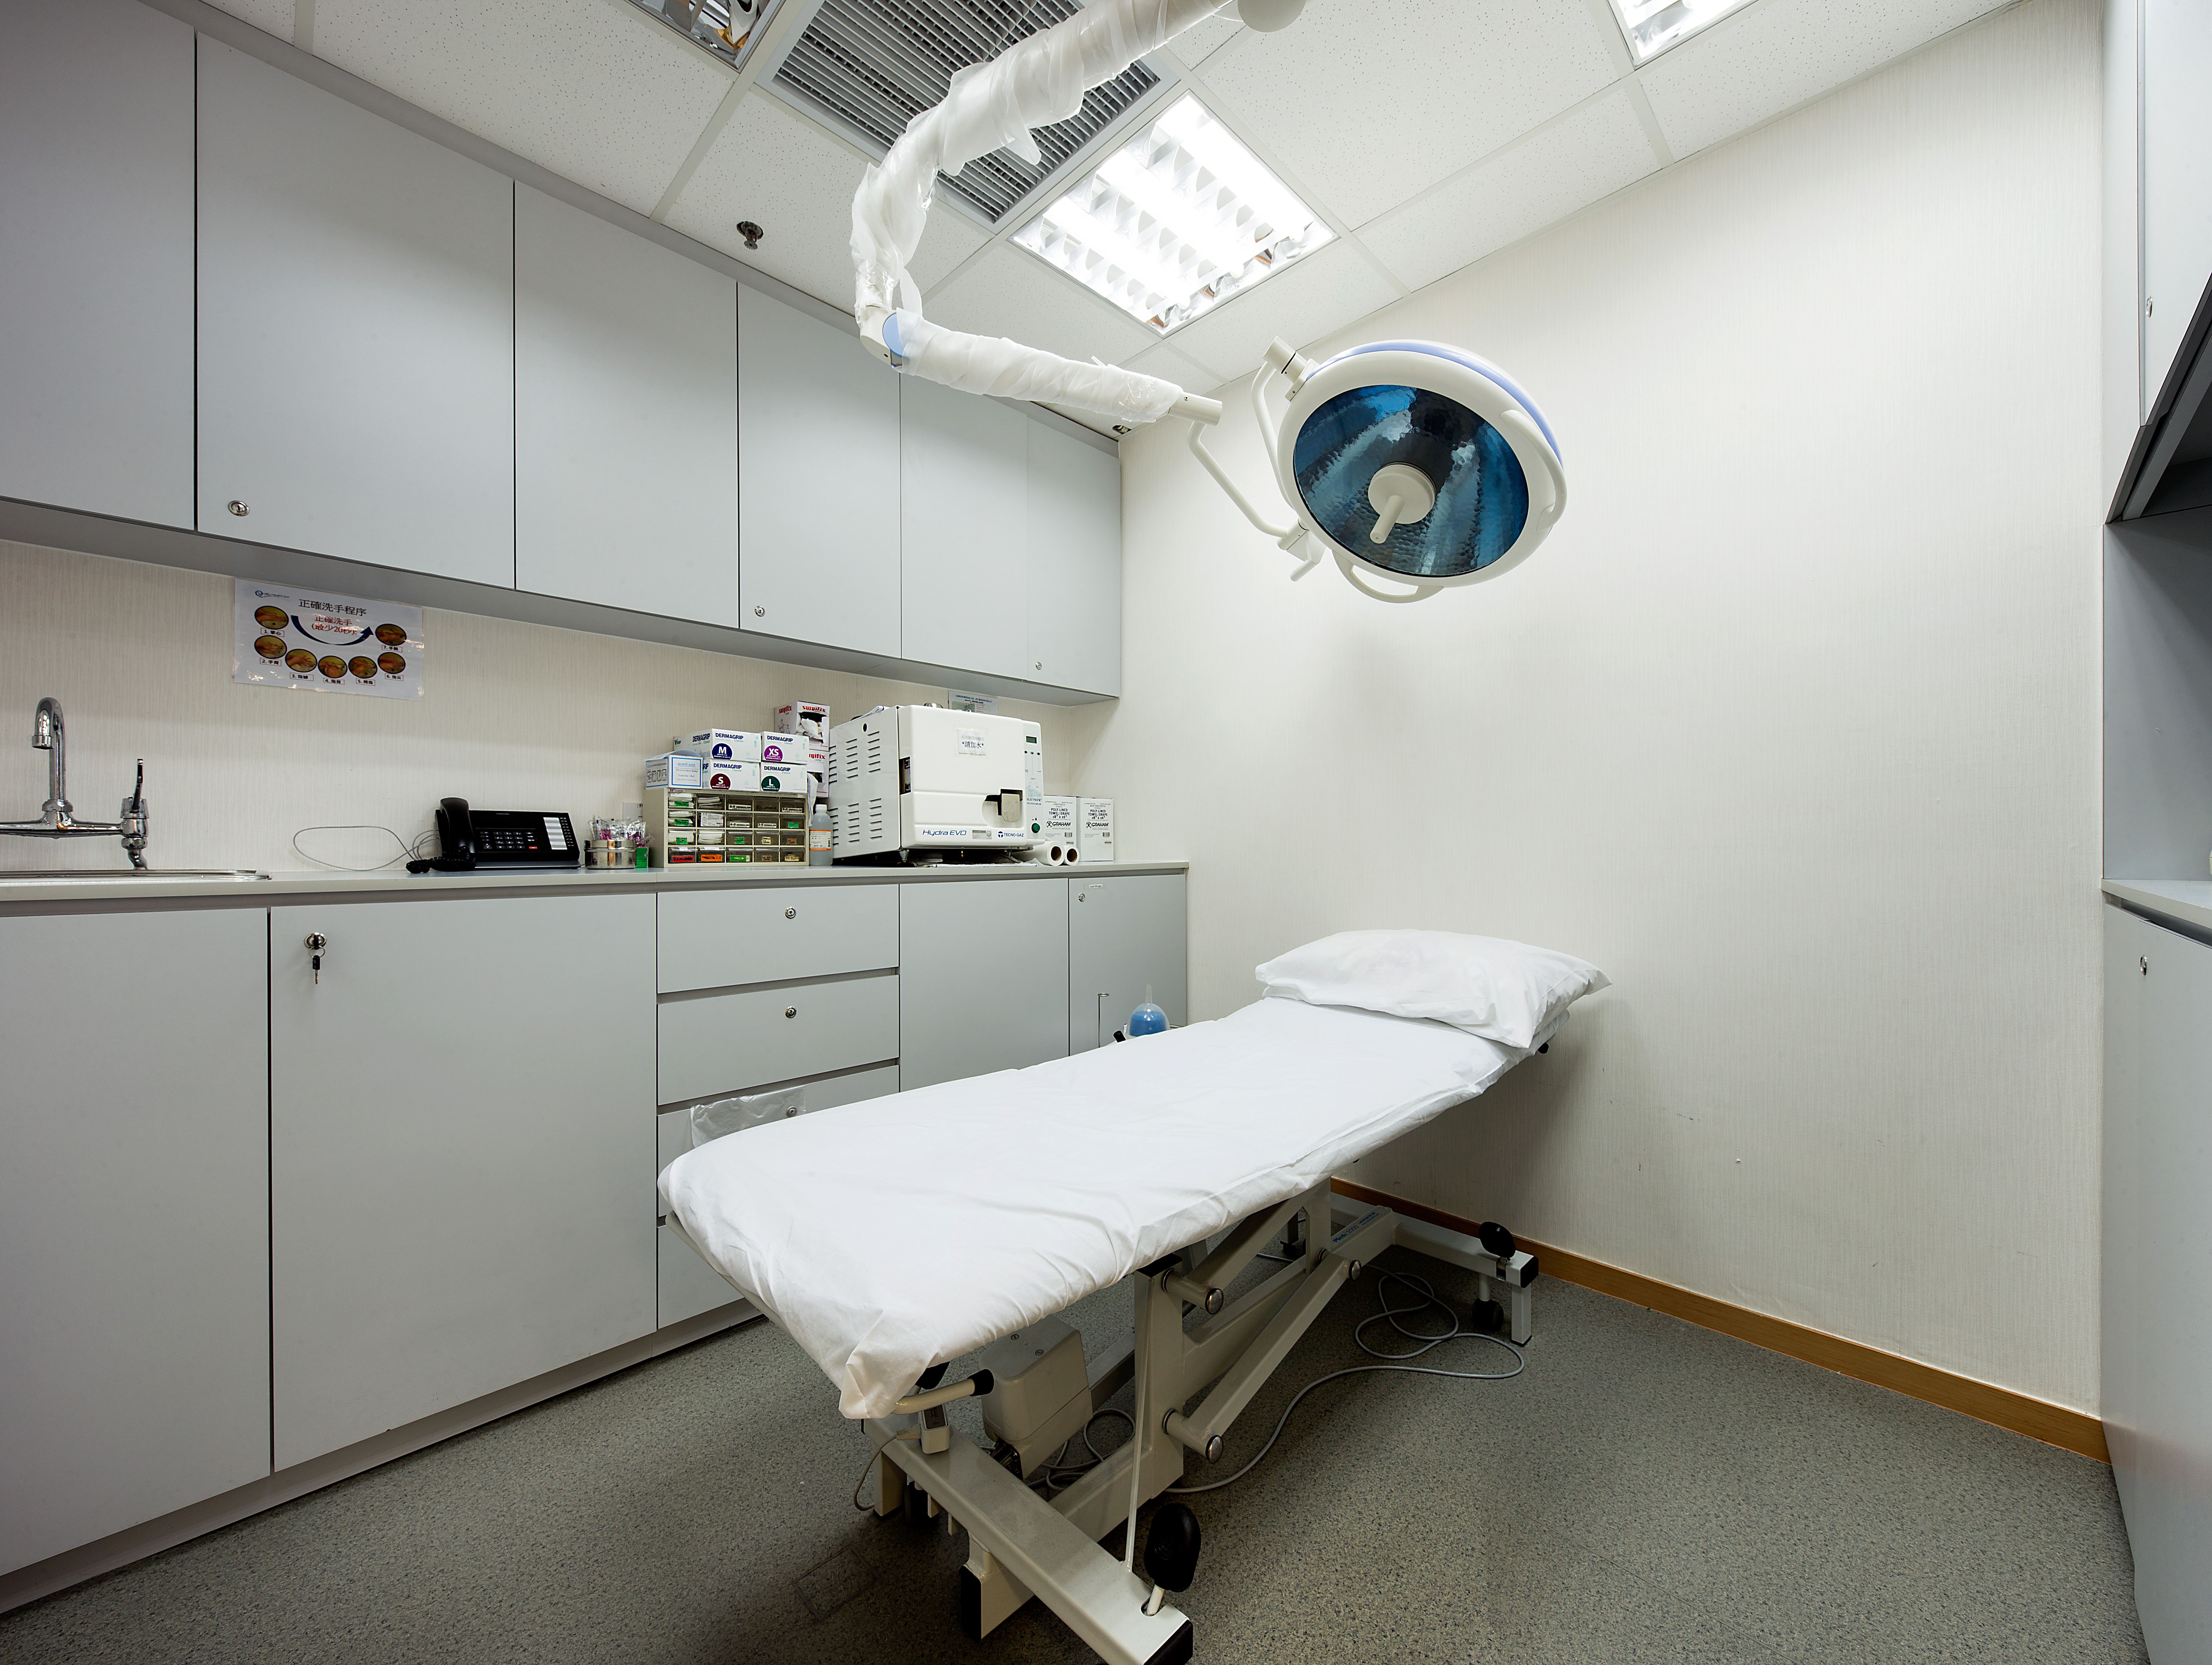 Examination room with patient bed, overhead light and cabinets